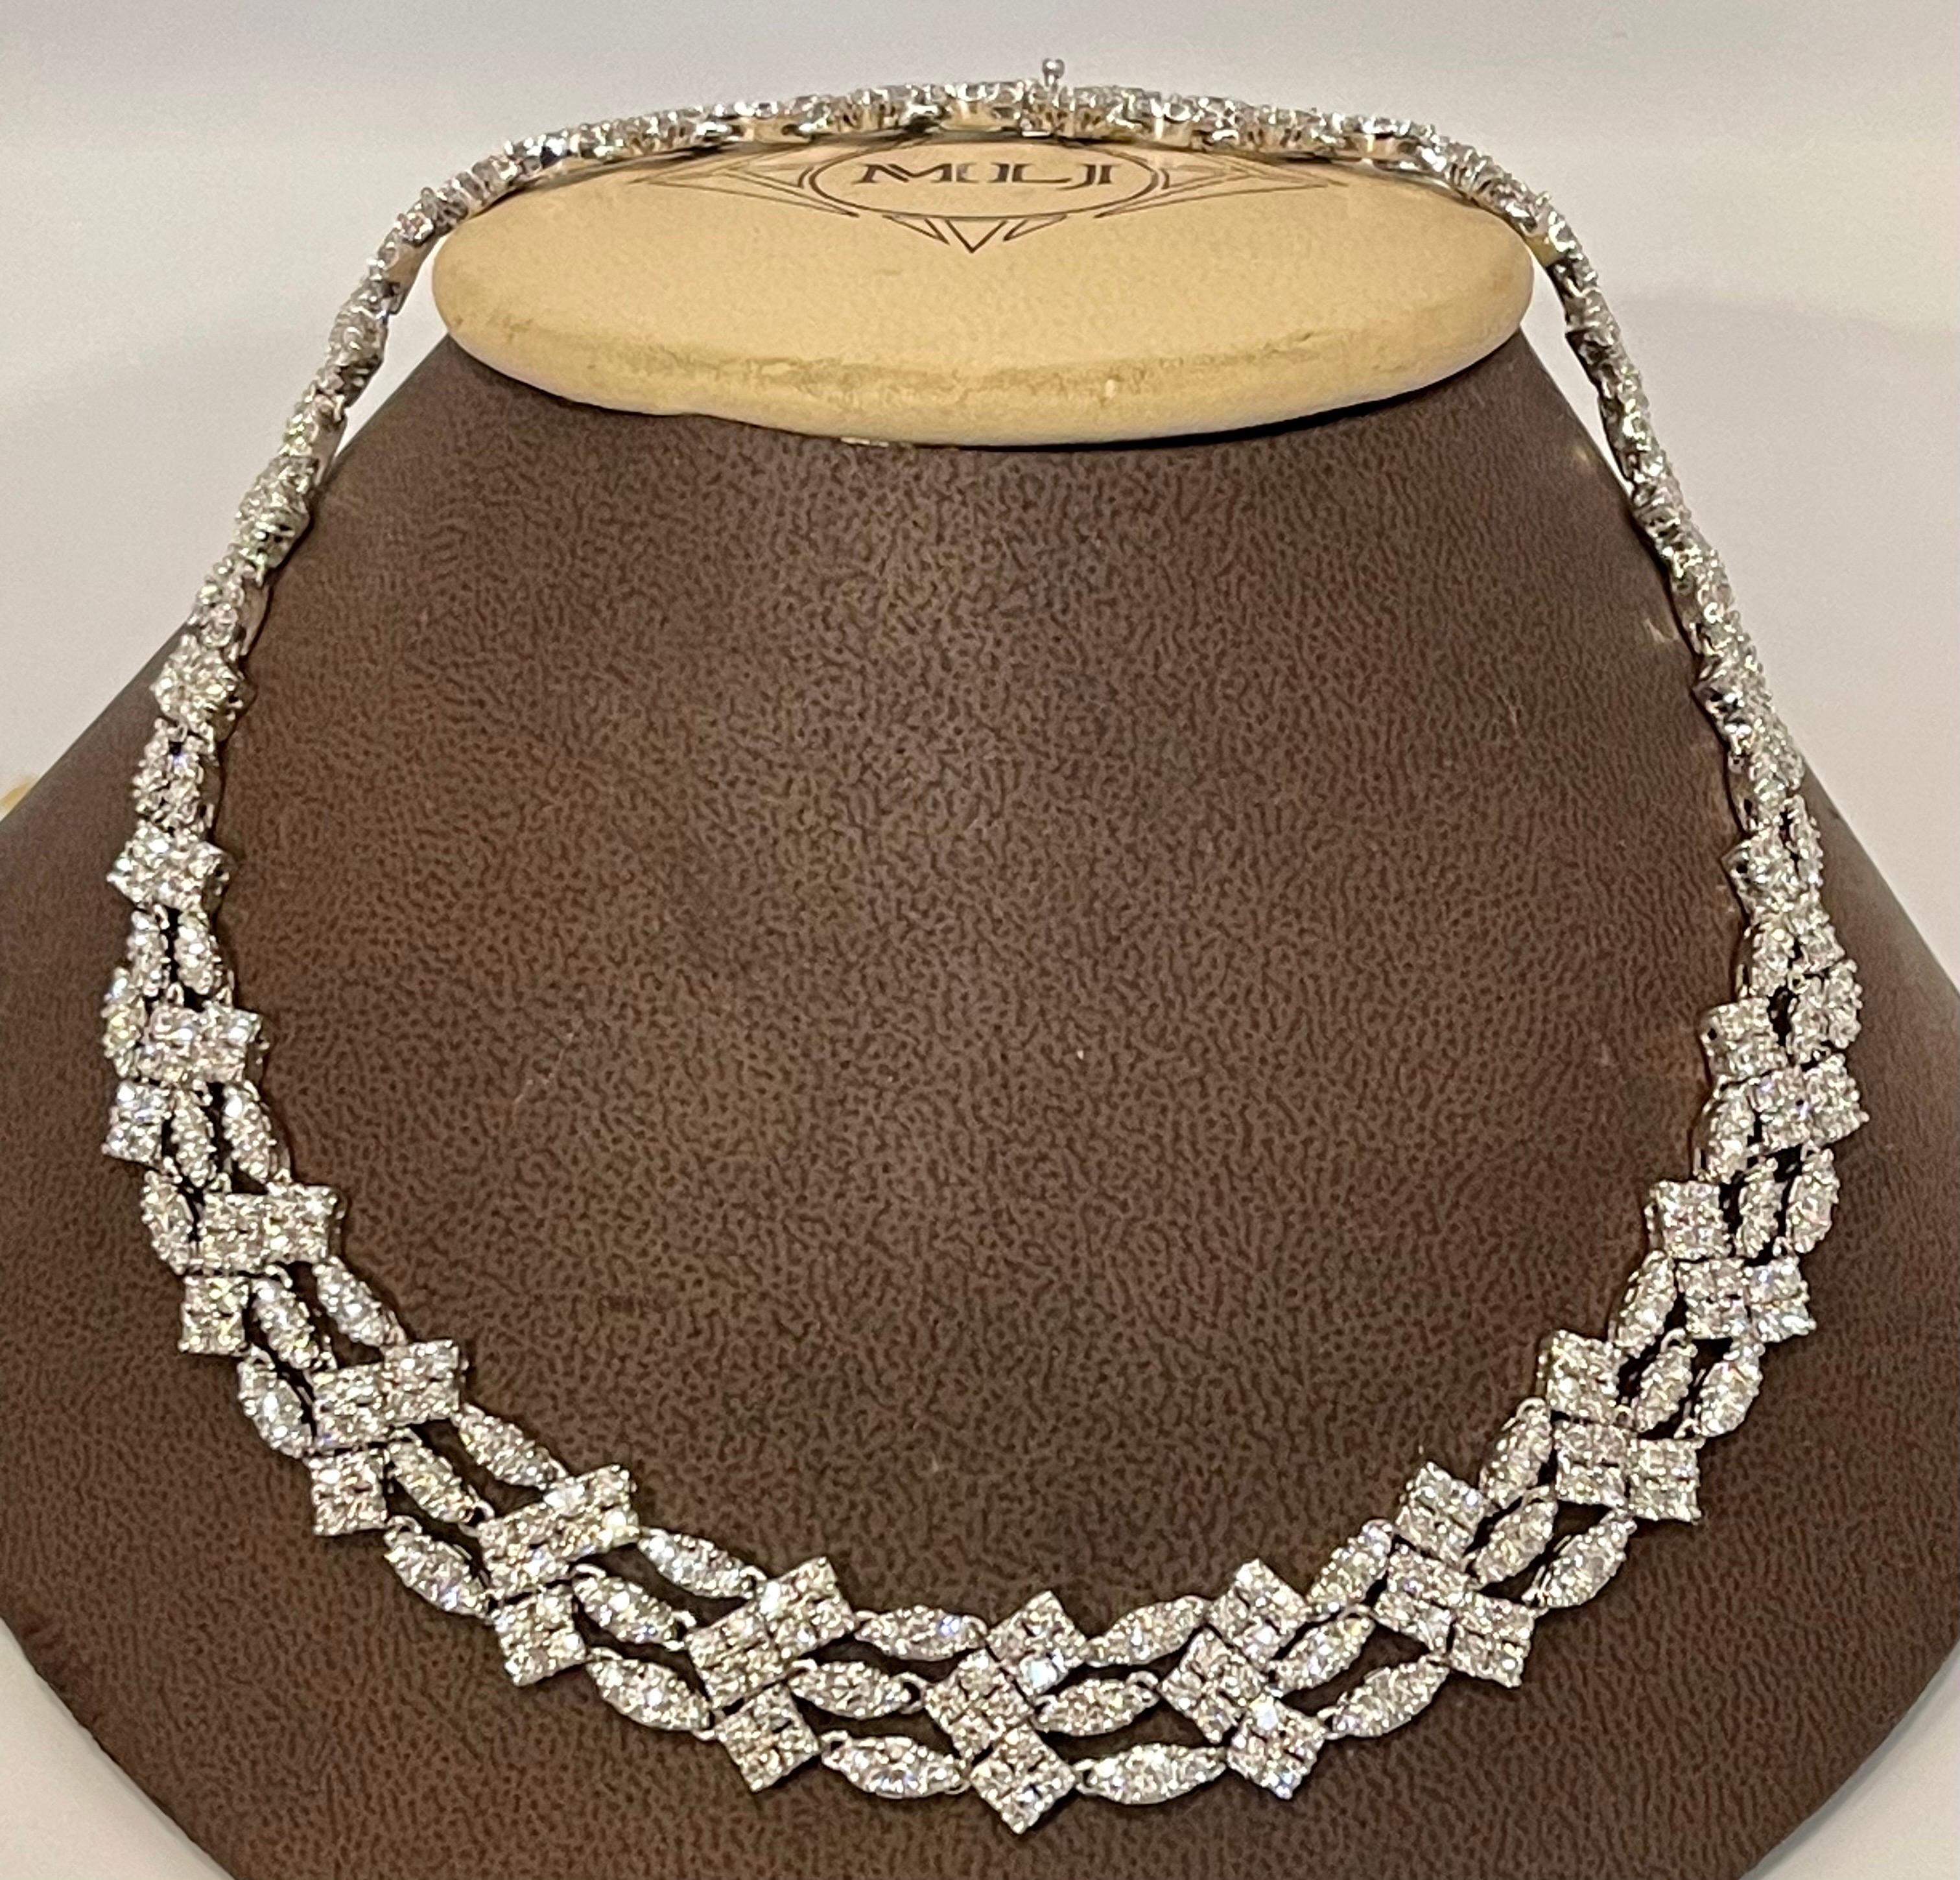 Sidney Garber's Vintage 35 Ct Diamond Bridal Necklace 18 Karat White Gold 60 Gm In Excellent Condition For Sale In New York, NY